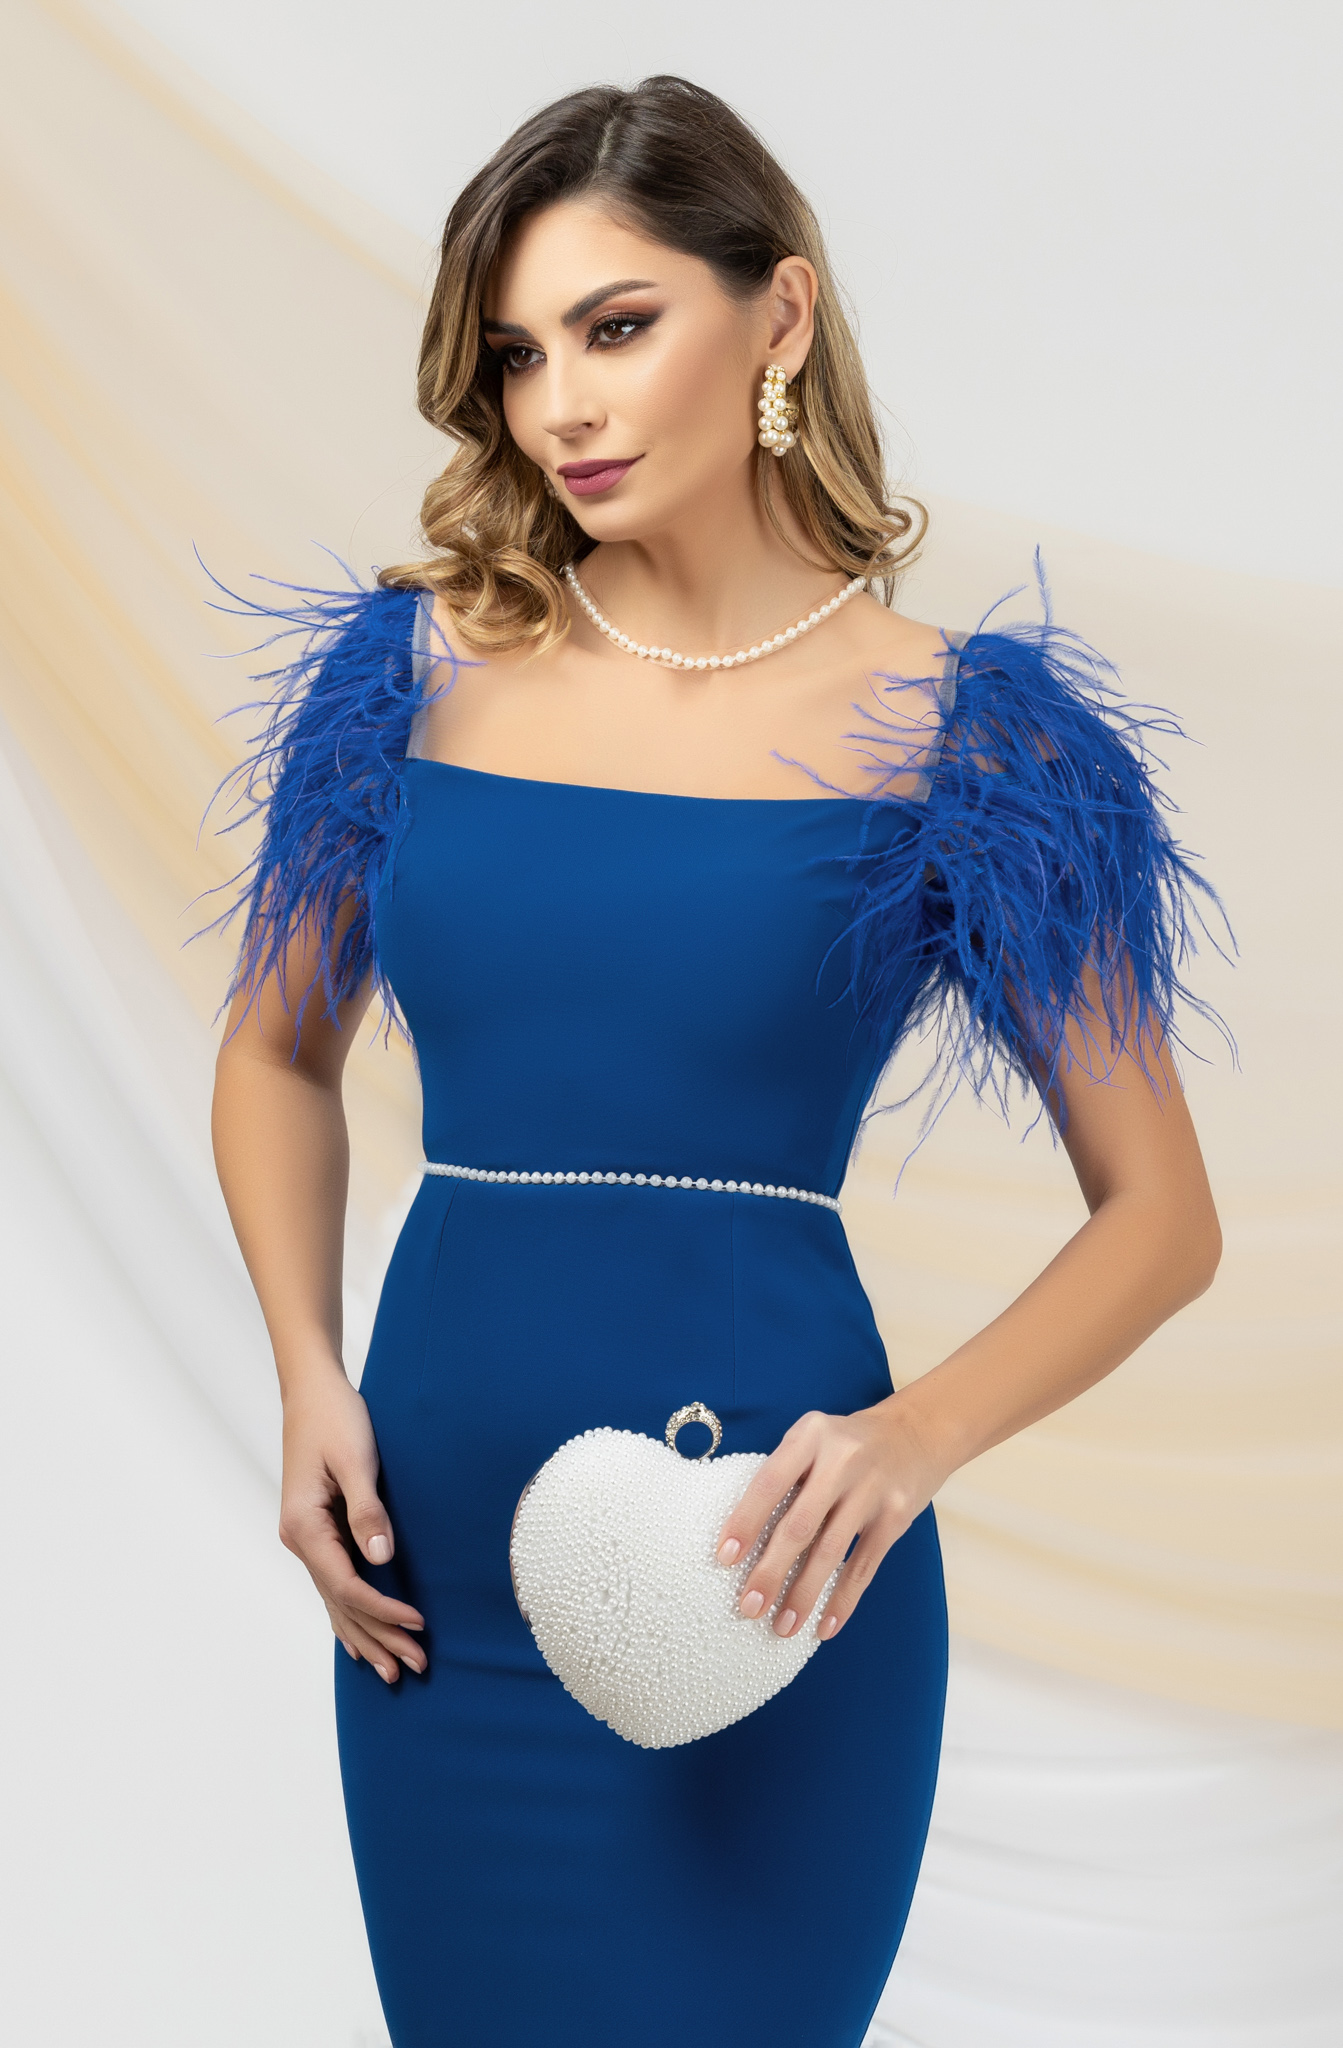 Blue dress pencil occasional feather details with pearls